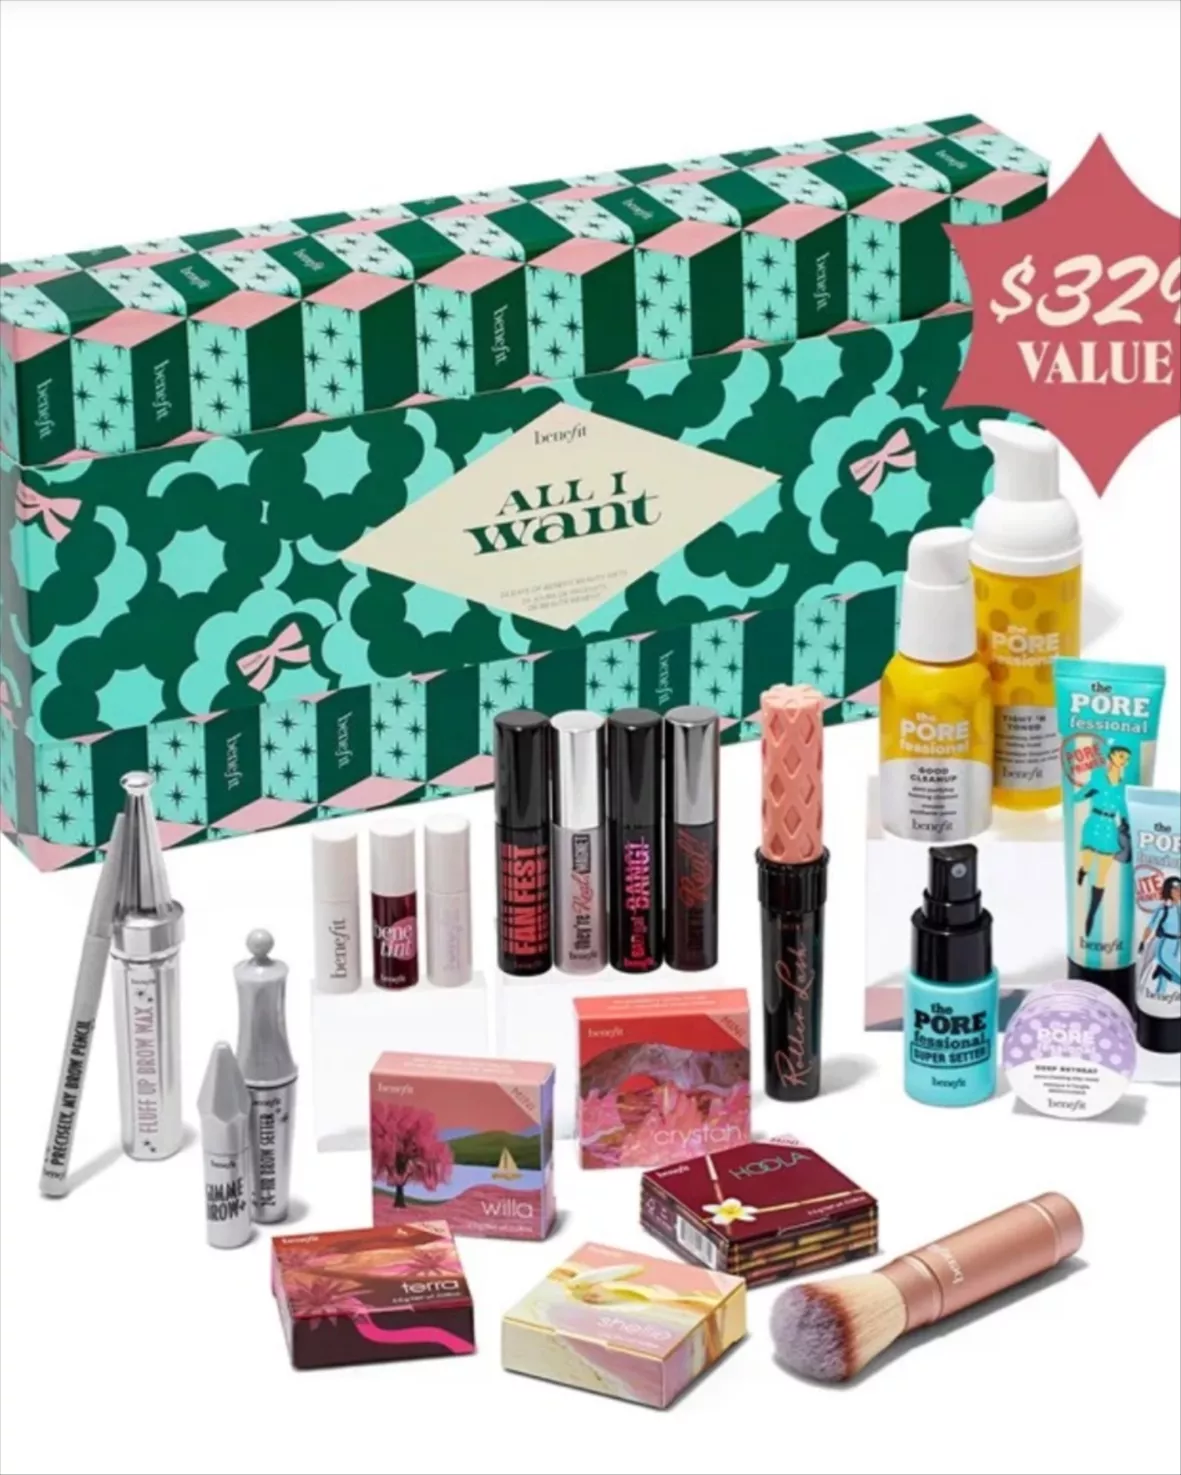 All I Want Beauty Advent Calendar curated on LTK